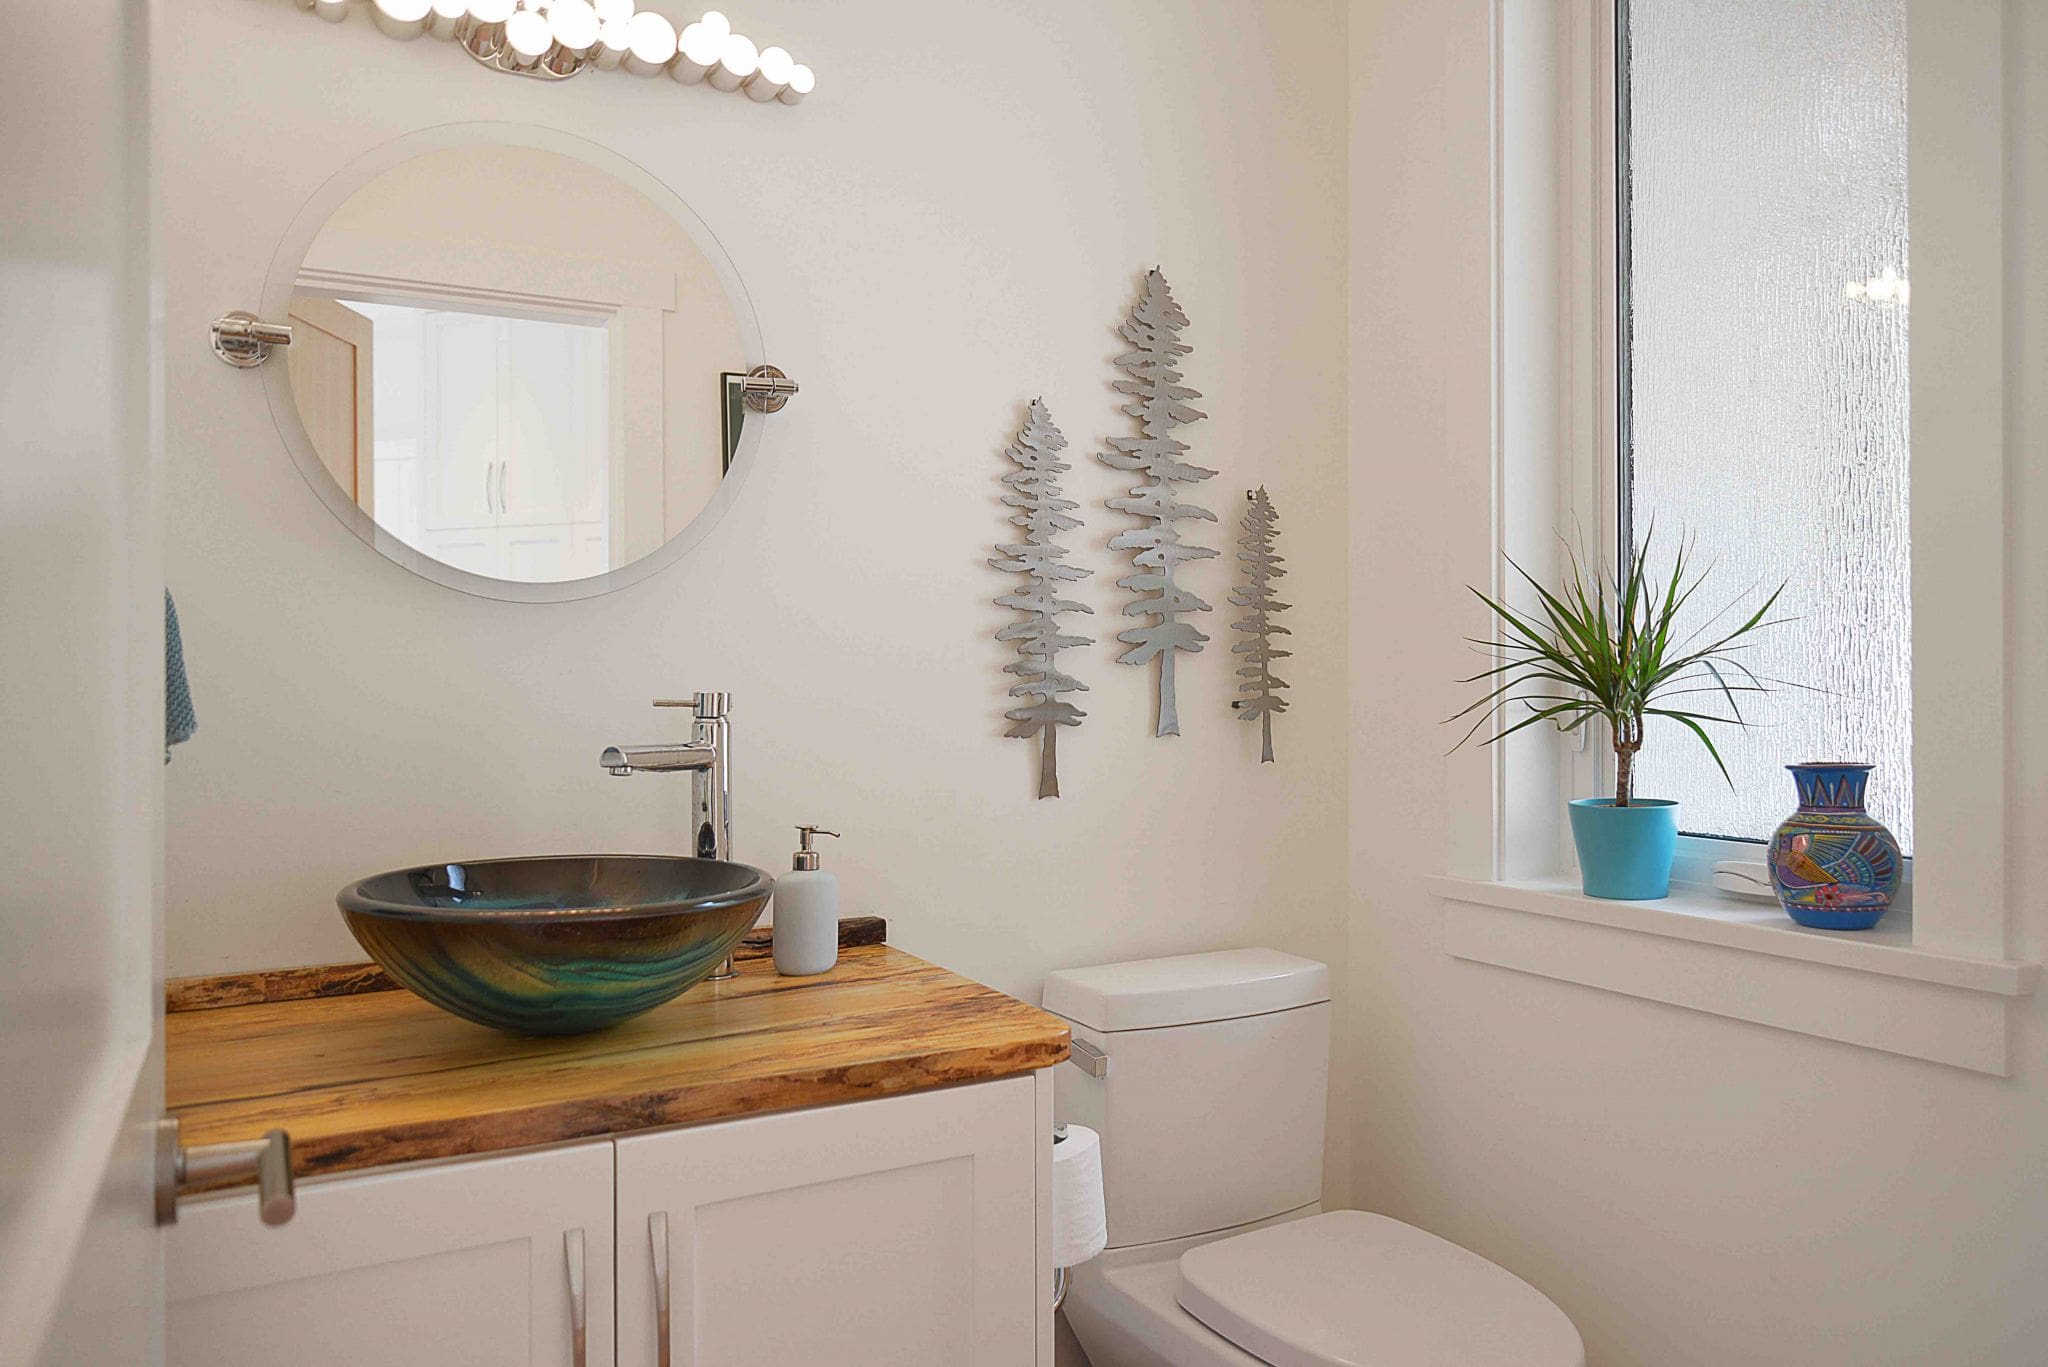 Bathroom with modern sink and wall decorations